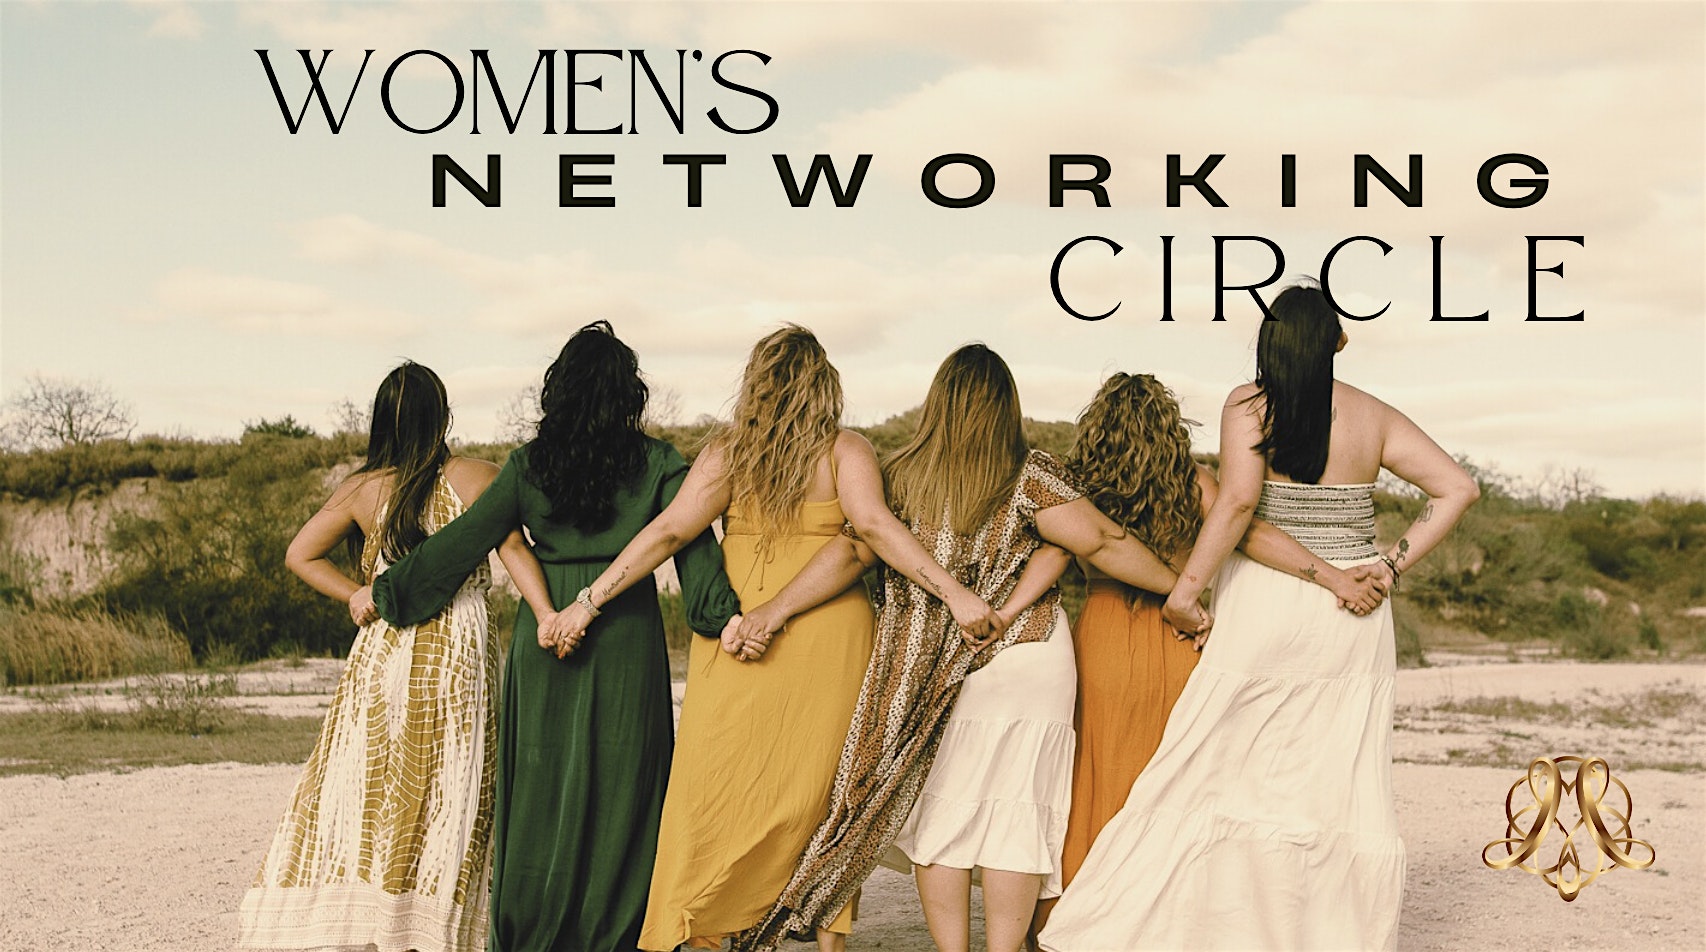 WOMEN'S NETWORKING CIRCLE FOR HOLISTIC AND CREATIVE ENTREPRENEURS ORLANDO